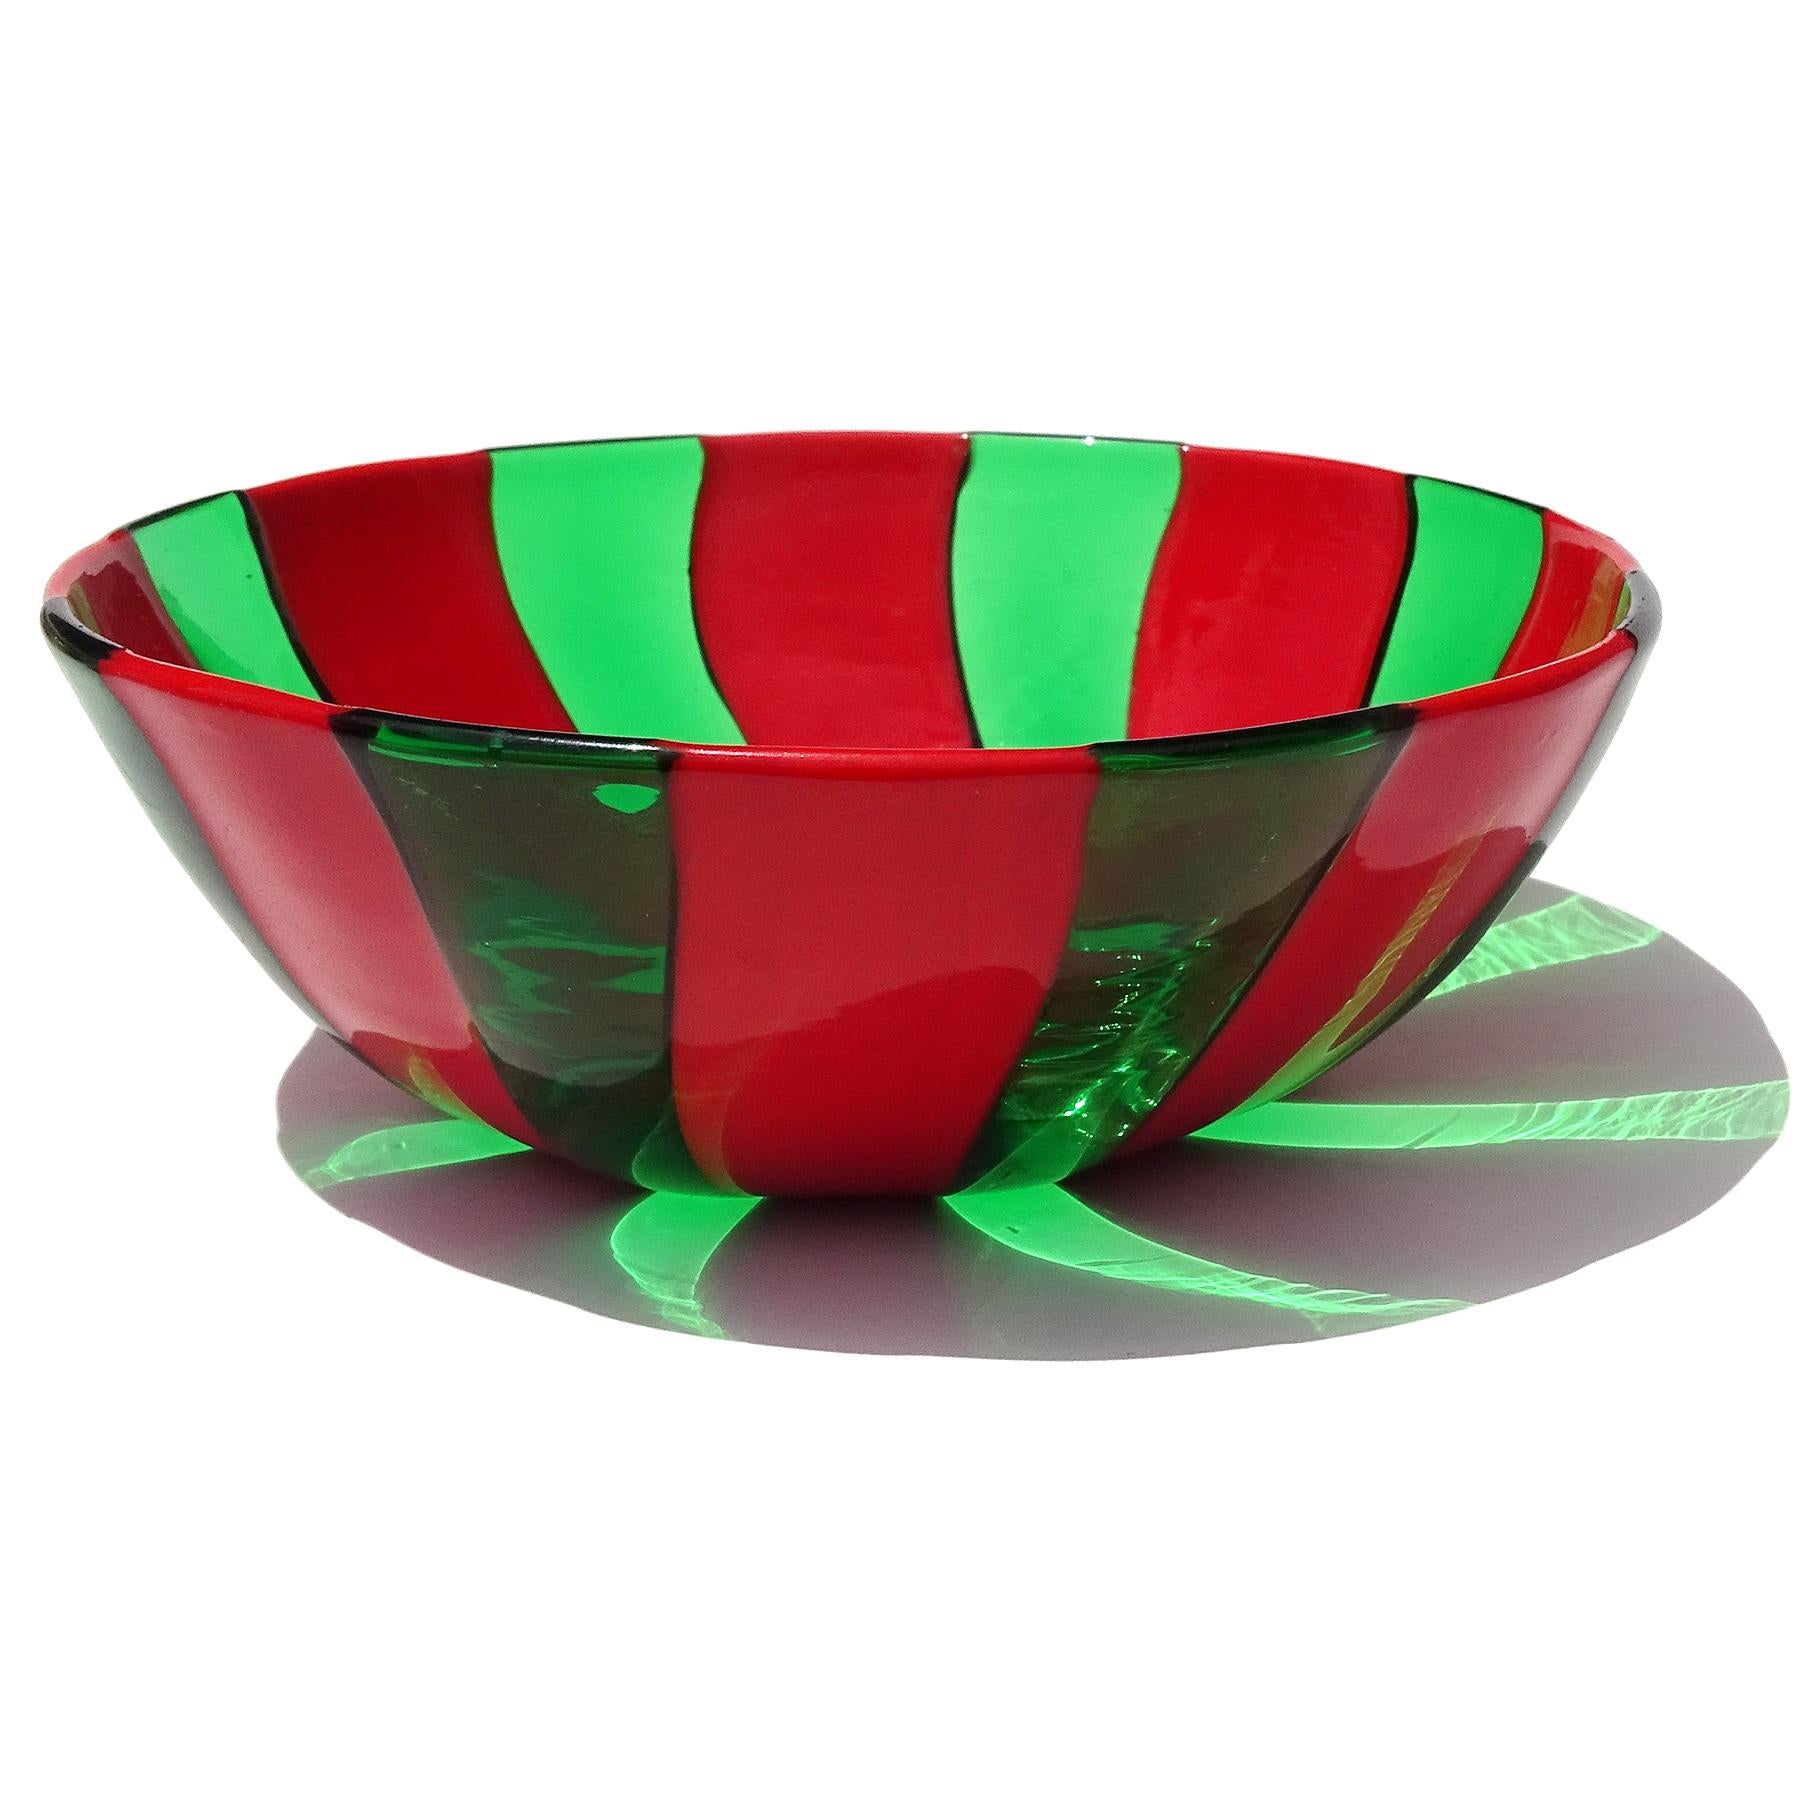 Beautiful vintage Murano hand blown red and green stripes Italian art glass decorative dish, vide-poche bowl. The piece was create in a very thin glass, with alternating pattern of solid red and transparent green bands. You can feel each of the